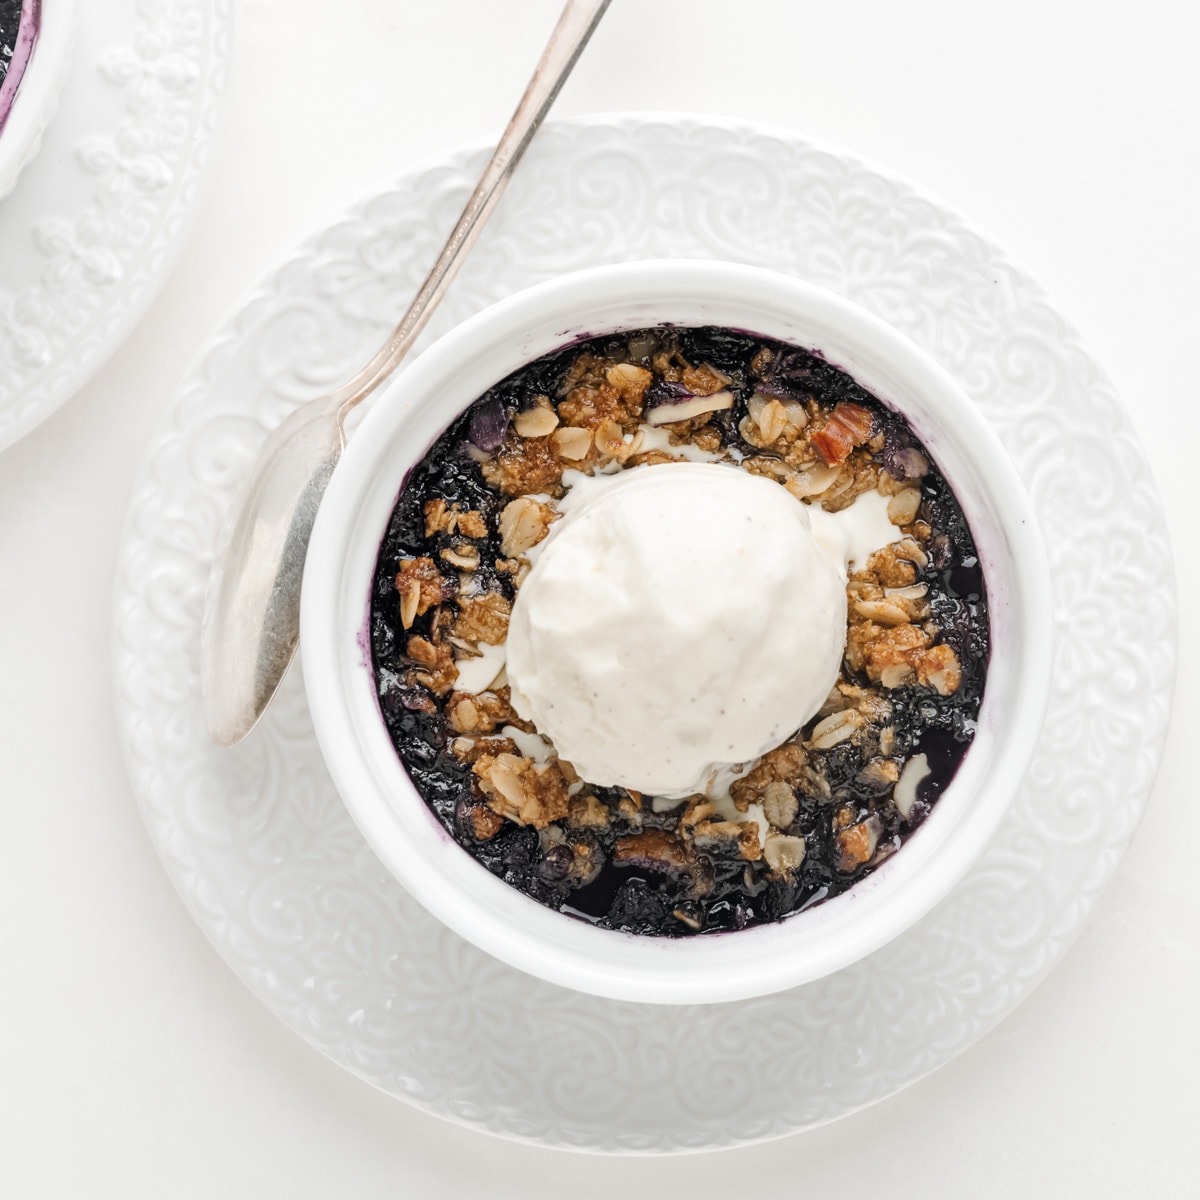 Blueberry crisp with a dollop of vanilla ice cream on top.